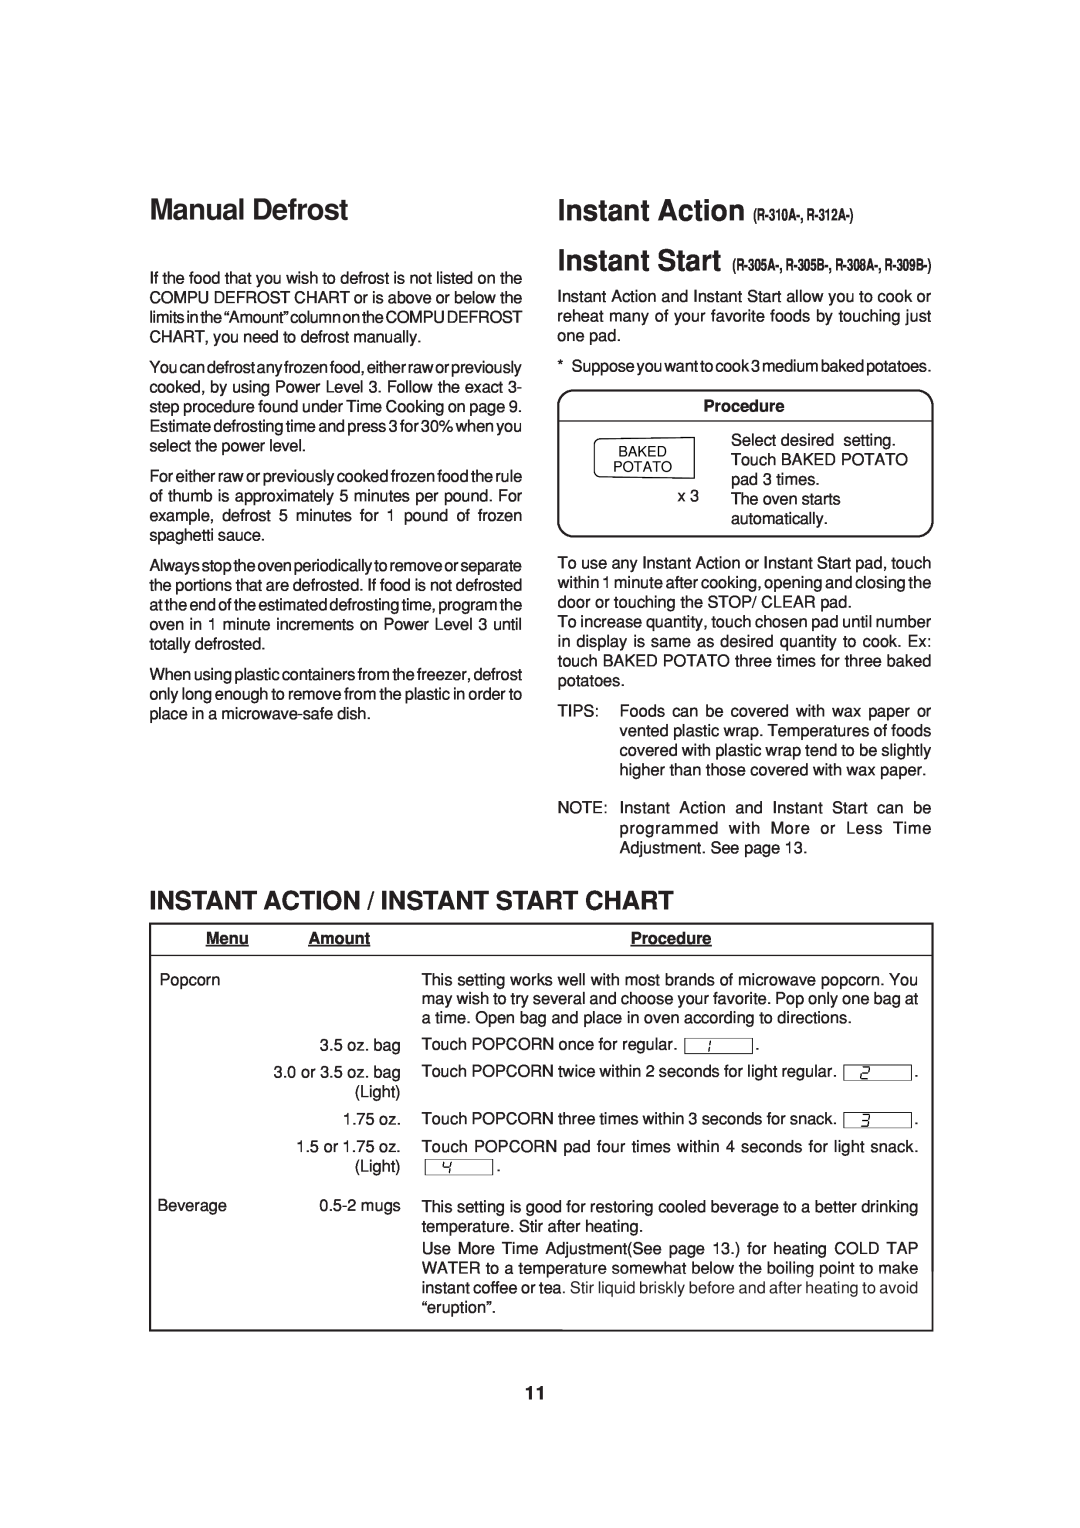 Sharp R-305A, R-312A, R-308A, R-309B, R-310A, R-305B operation manual Manual Defrost, Instant Action / Instant Start Chart 